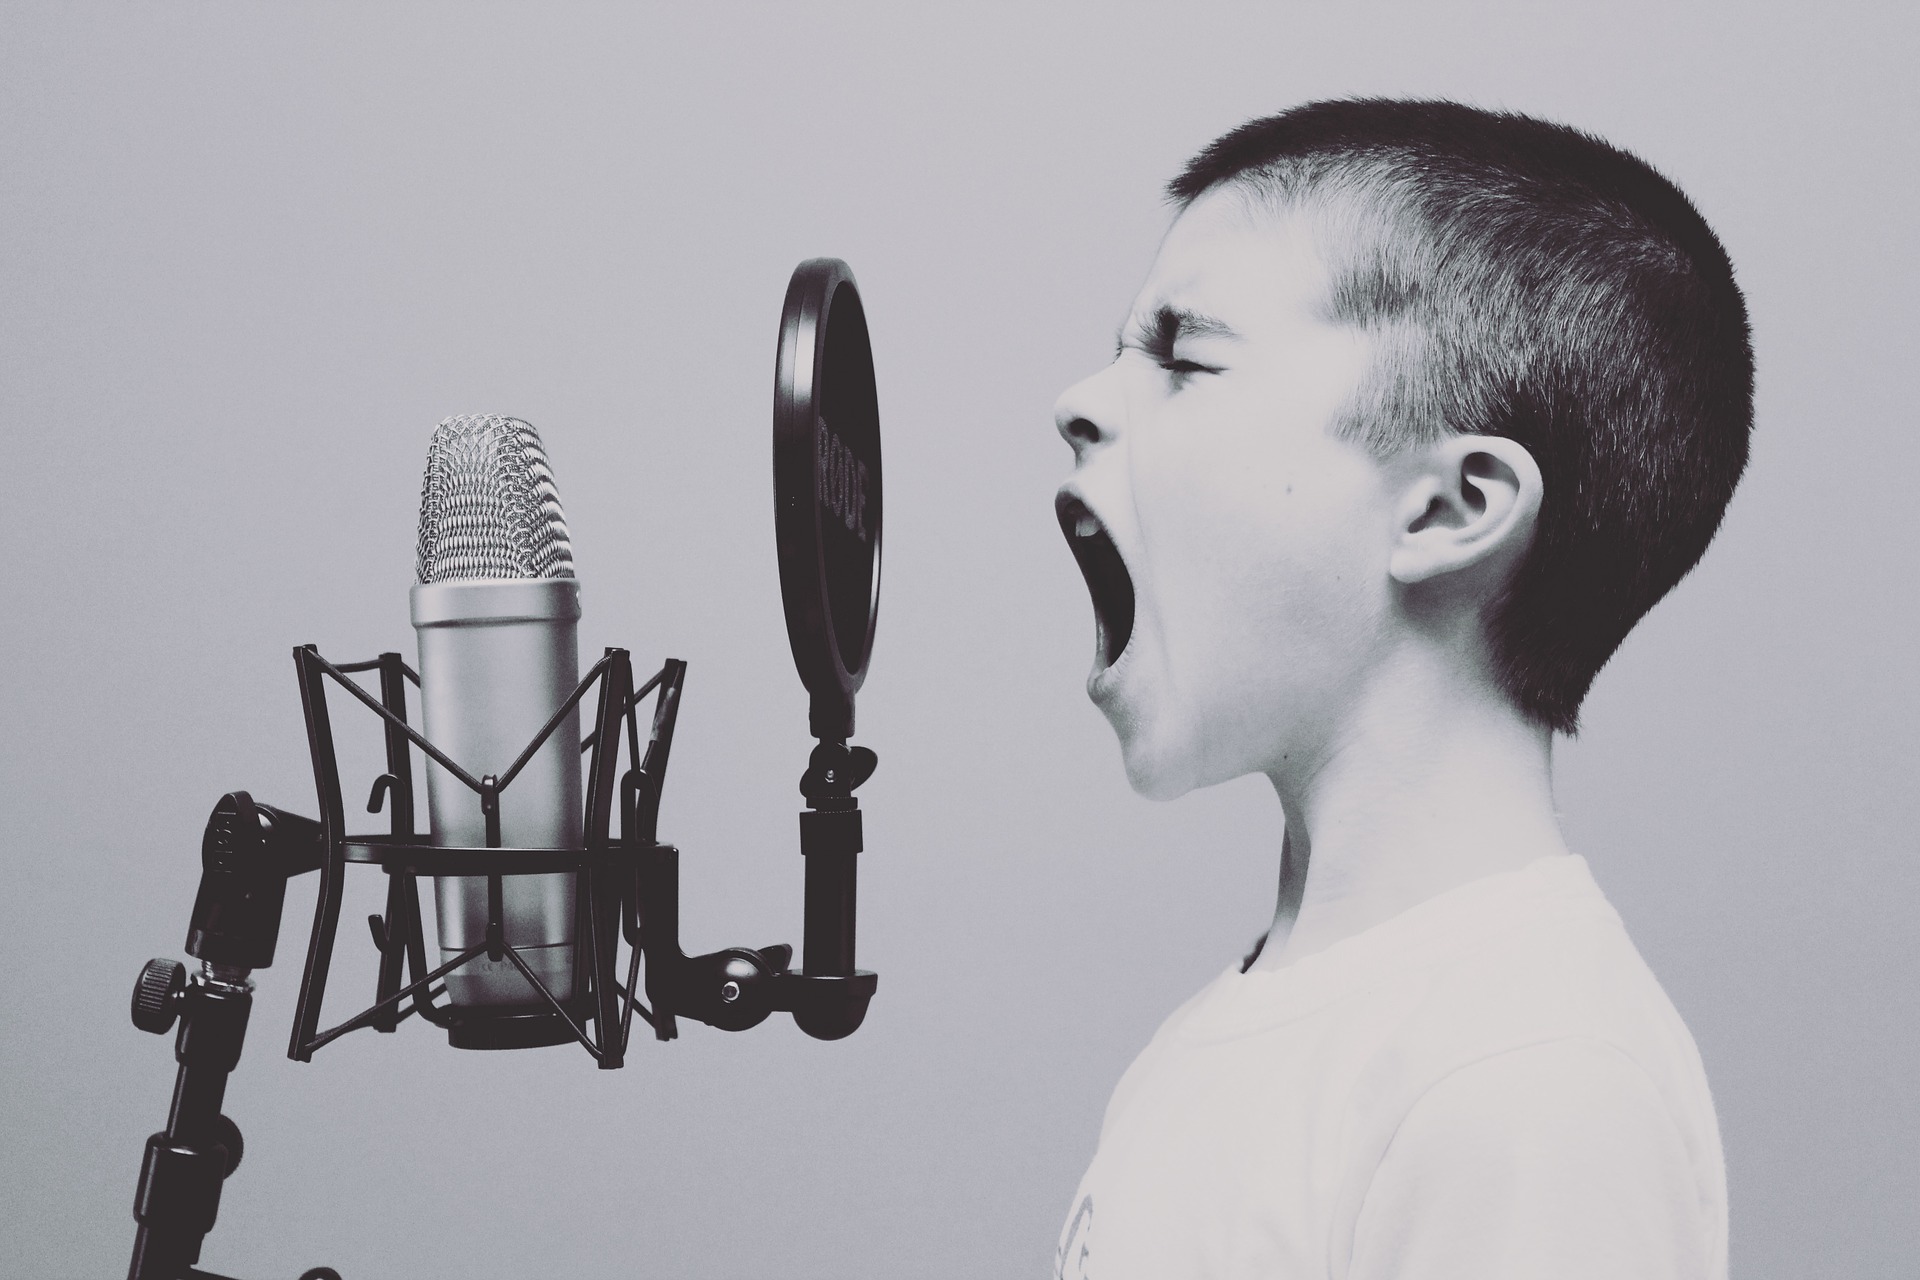 A boy is screaming into a microphone